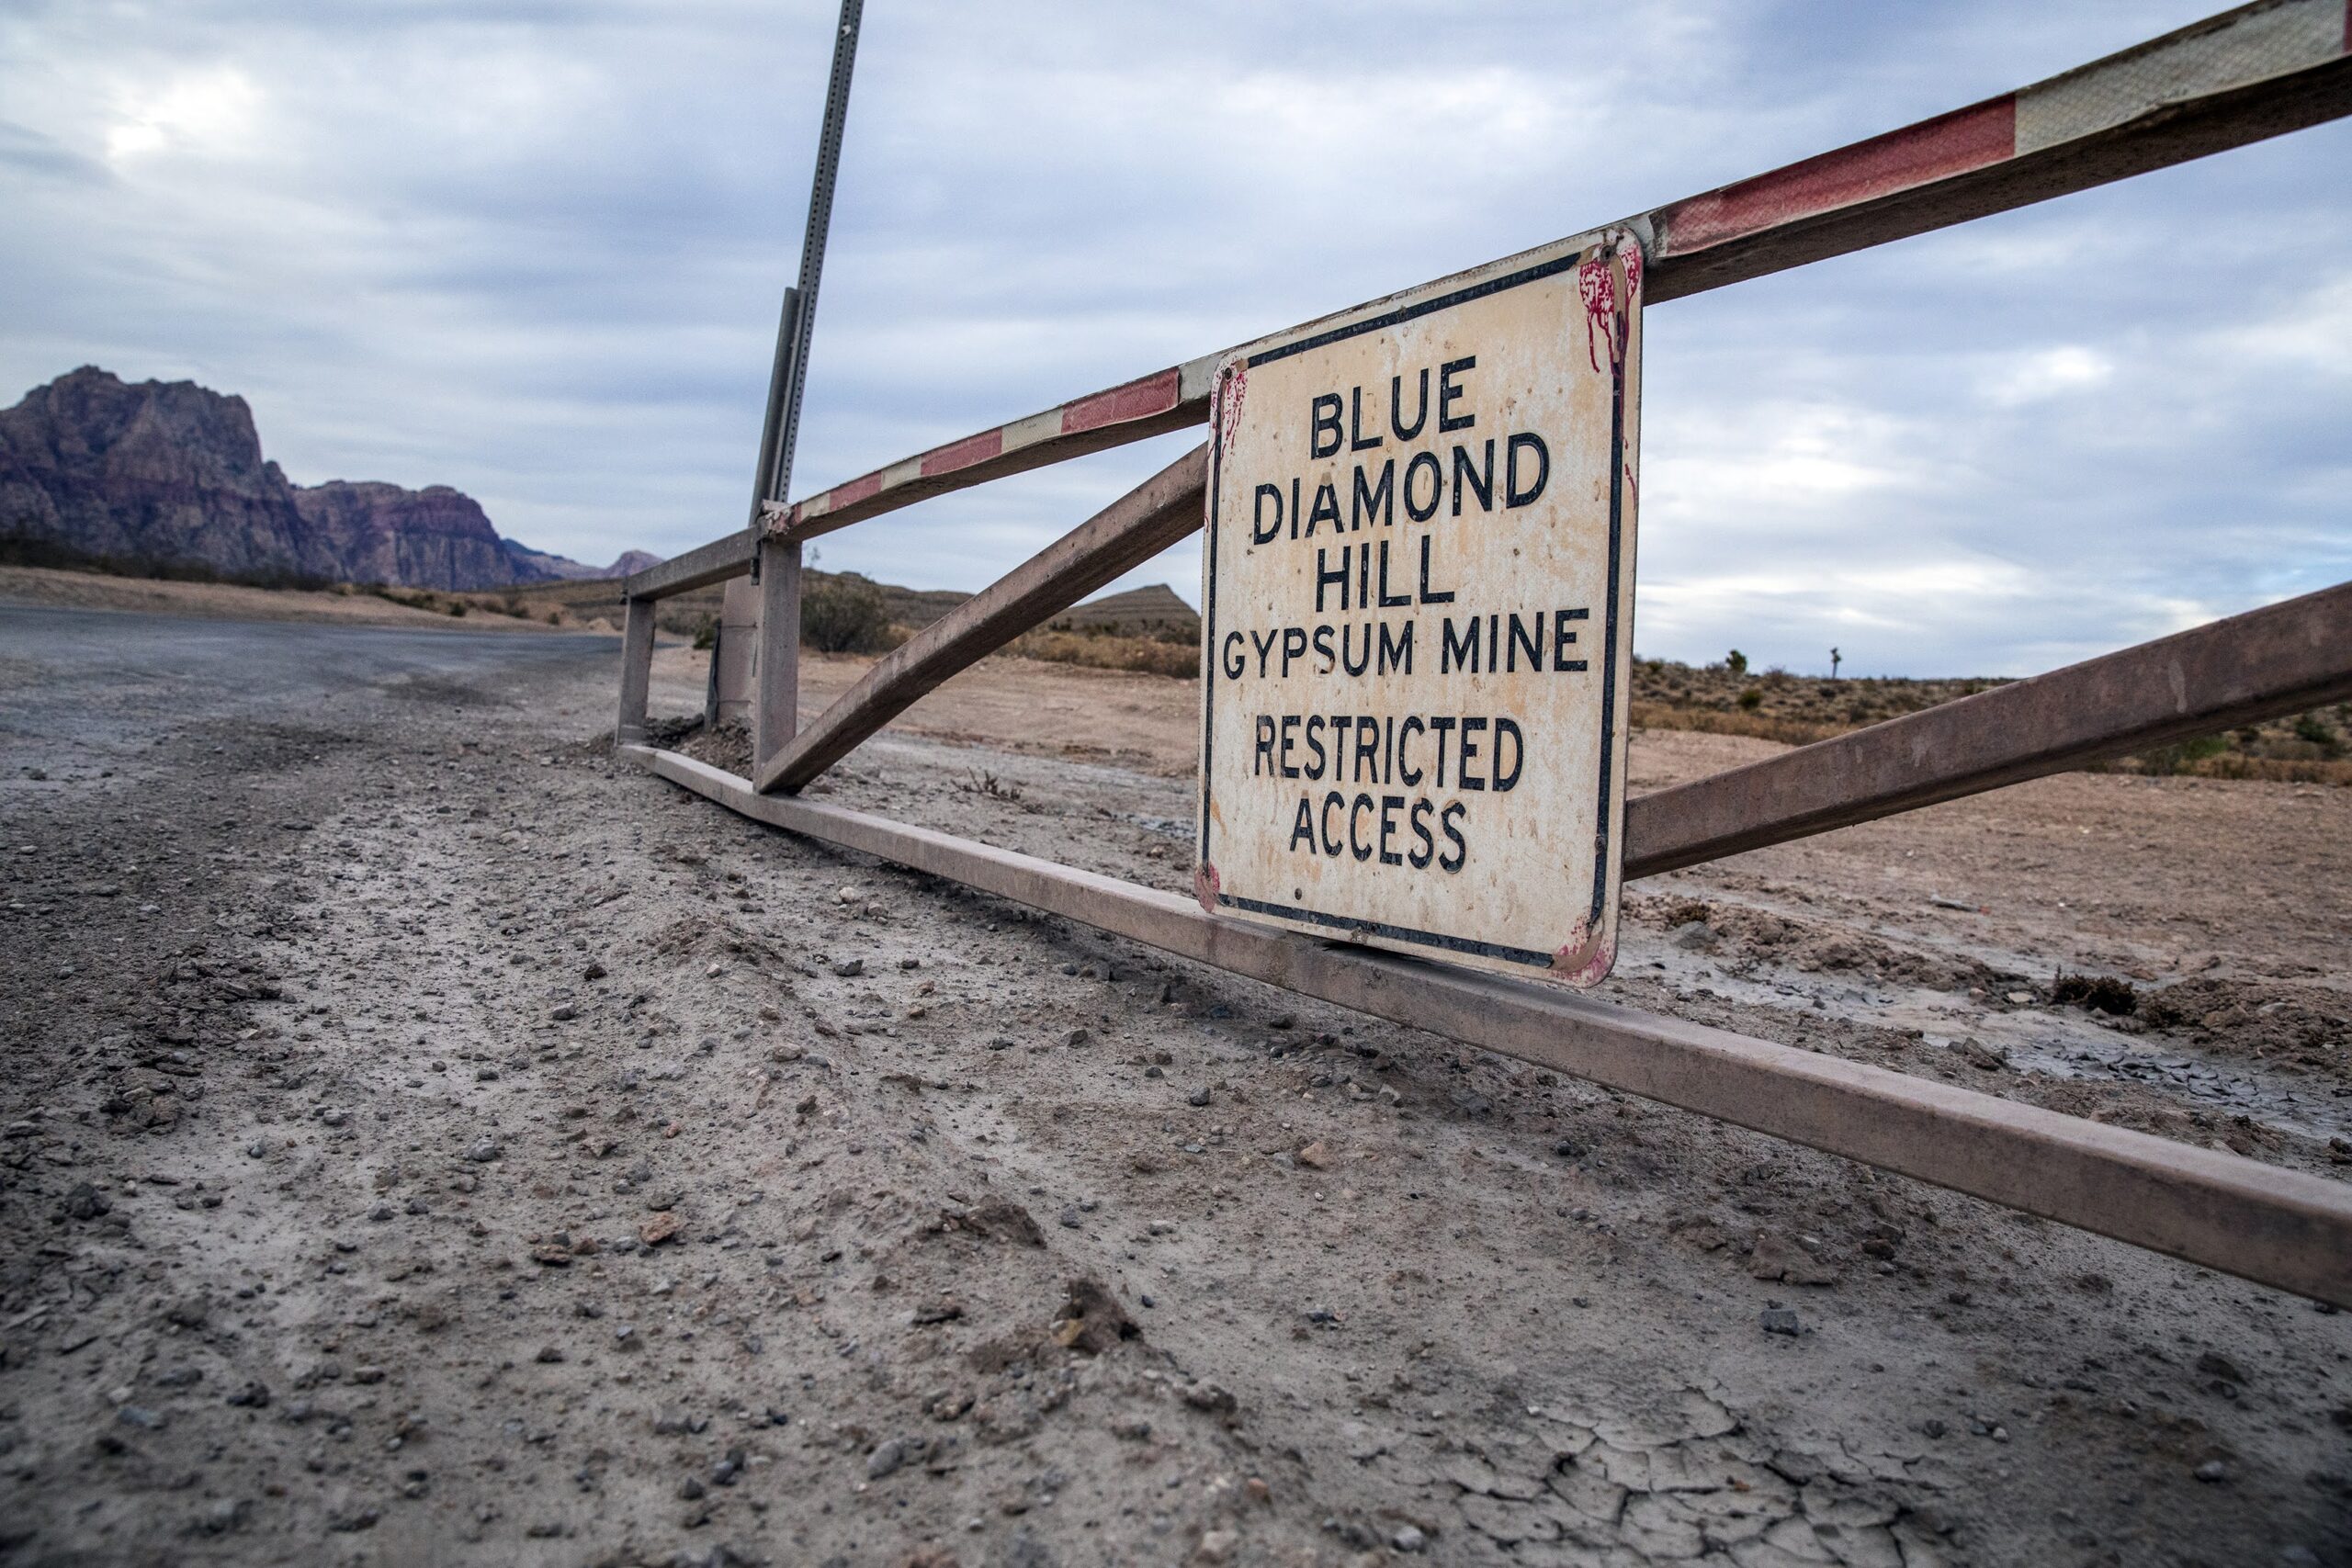 The entrance to the Blue Diamond Hill Gypsum Mine near the Red Rock Canyon National Conservation Area on Monday, June 7, 2021. (Jeff Scheid/The Nevada Independent).